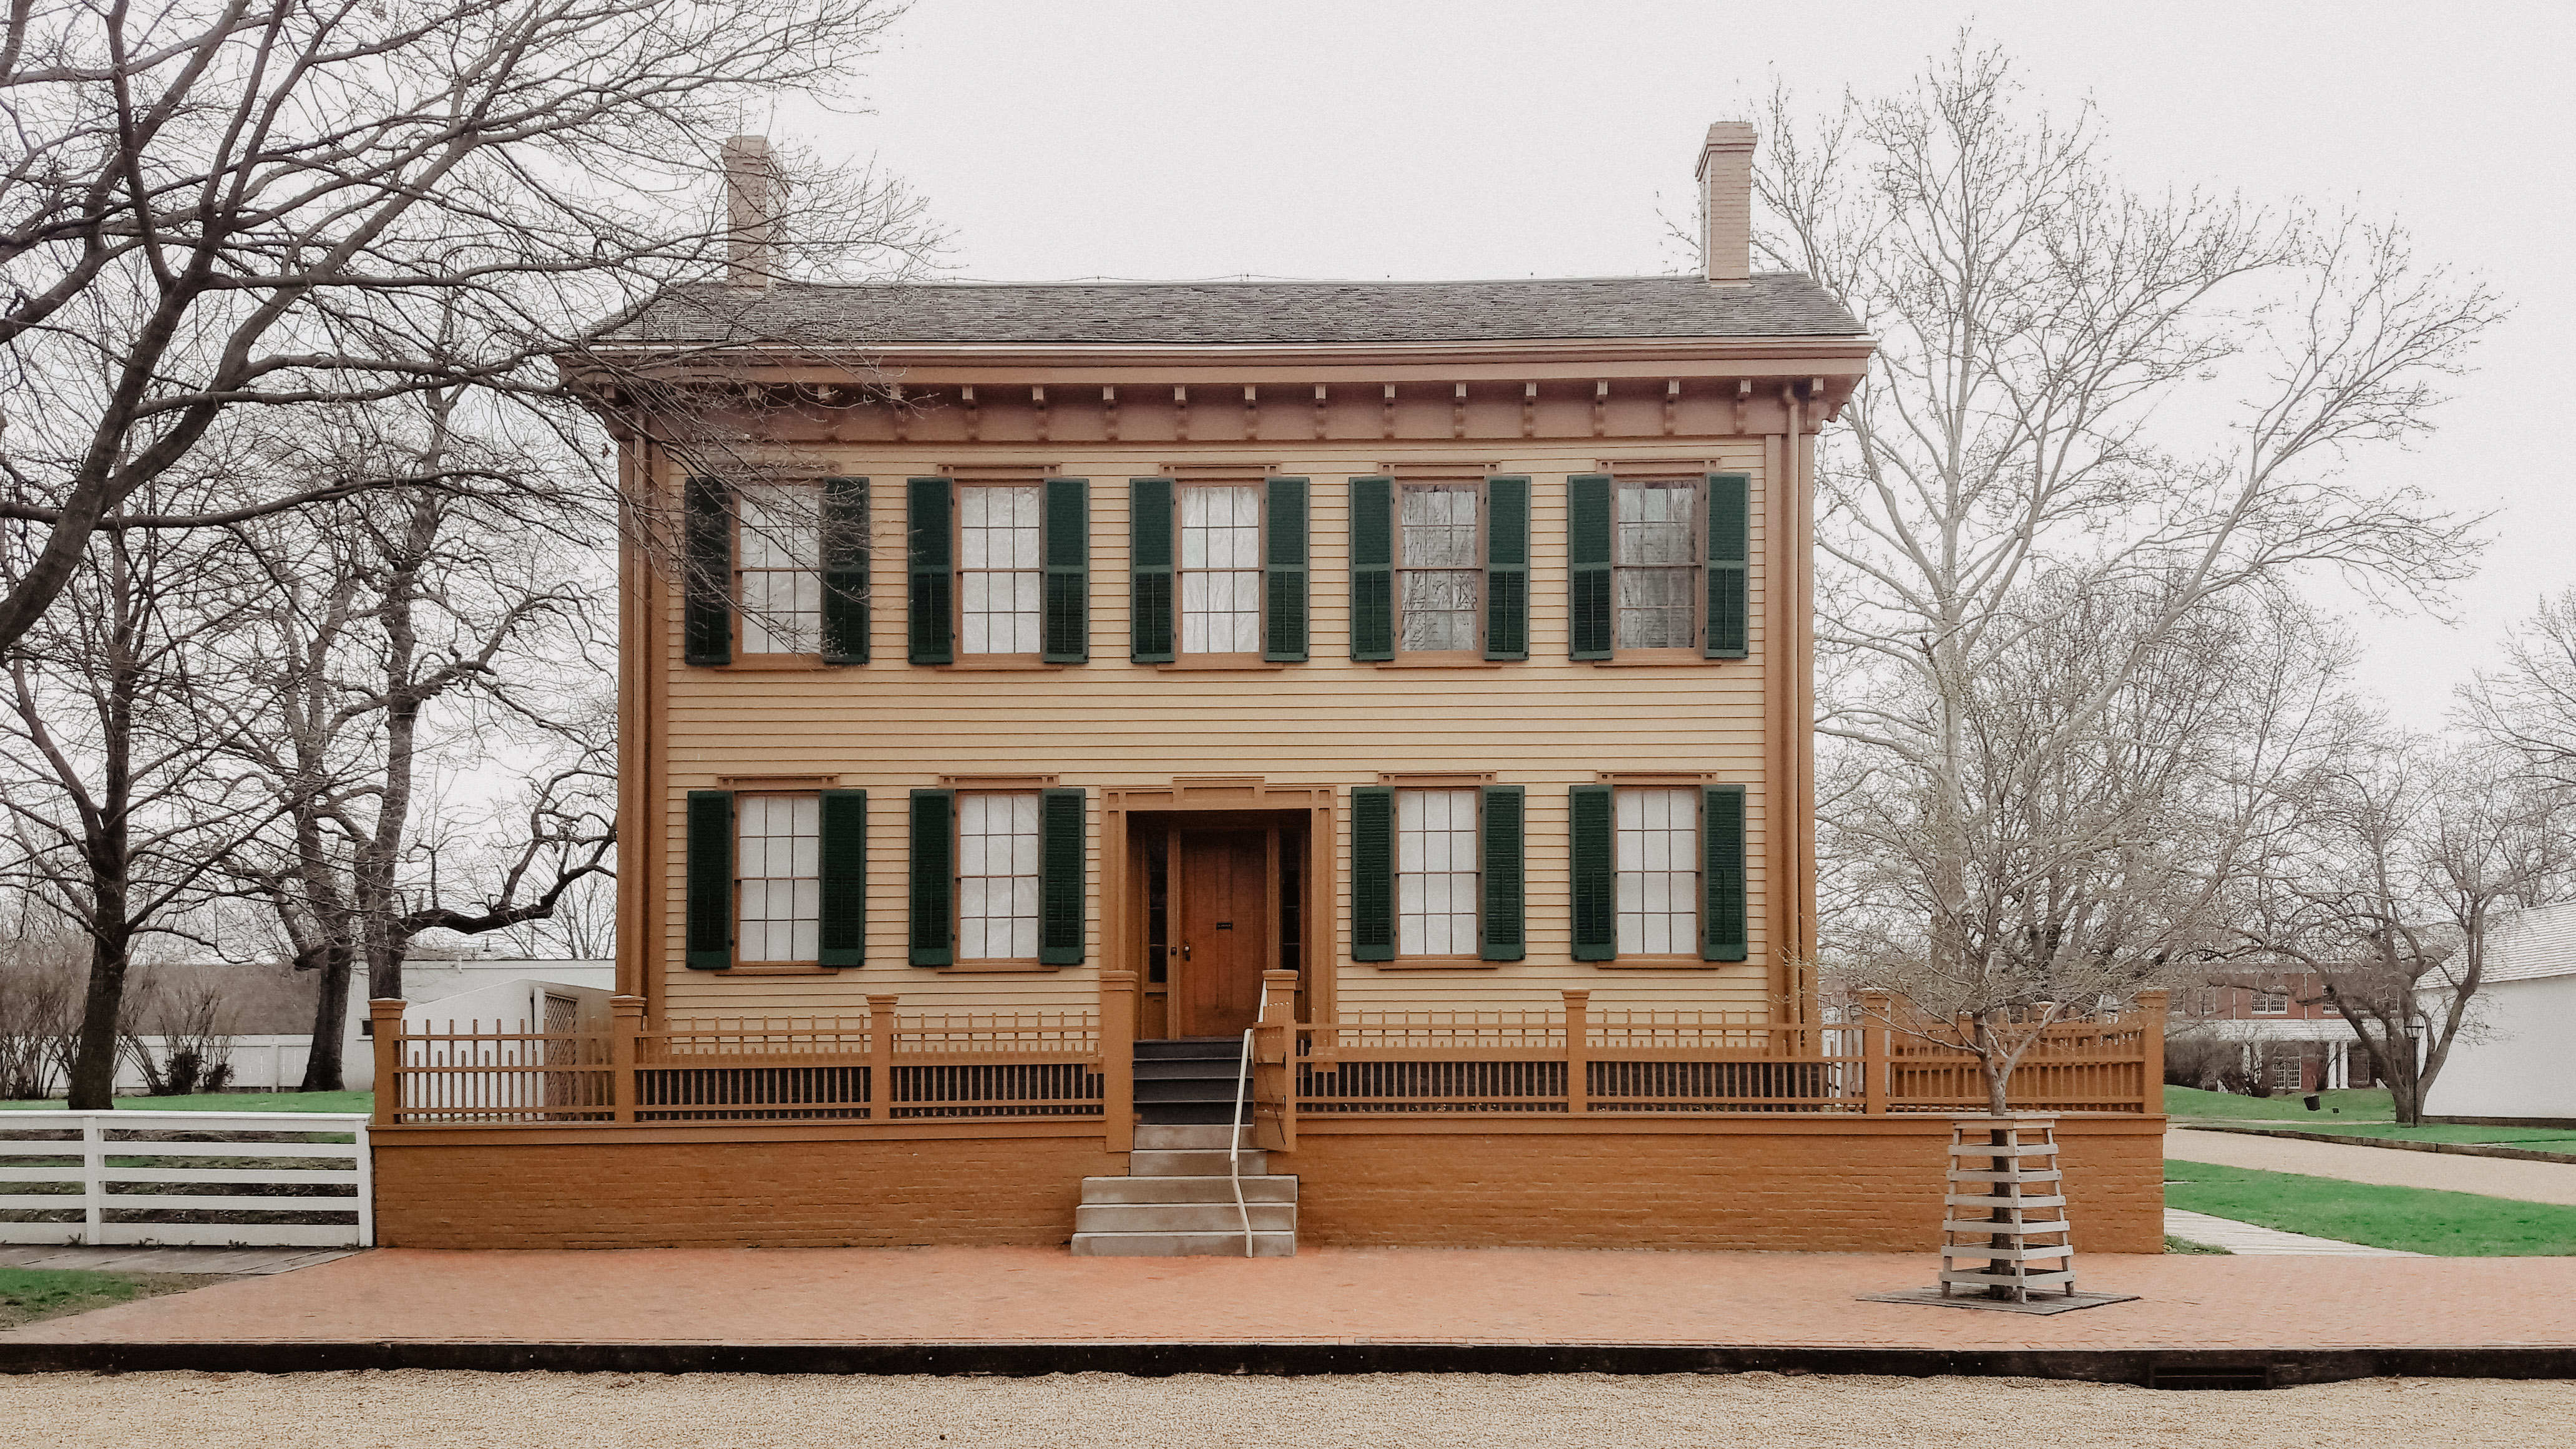 Lincoln Home National Historic Site in Springfield, Illinois - 1 day in Springfield